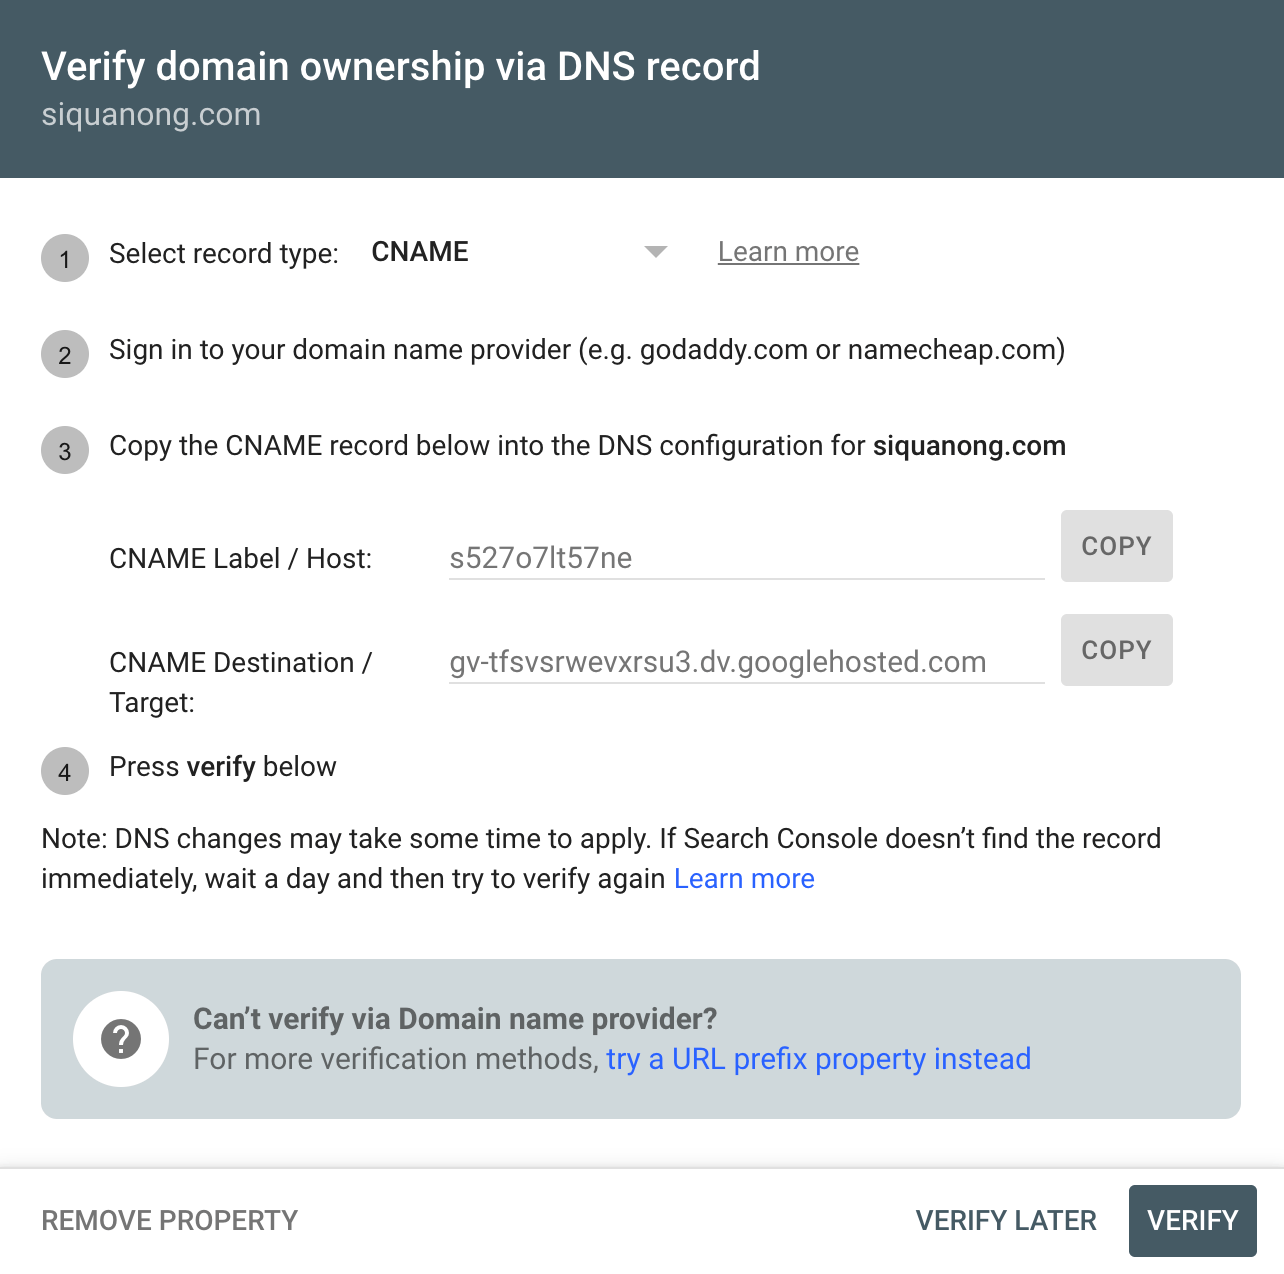 Verifying domain ownership via CNAME in Google Search Console